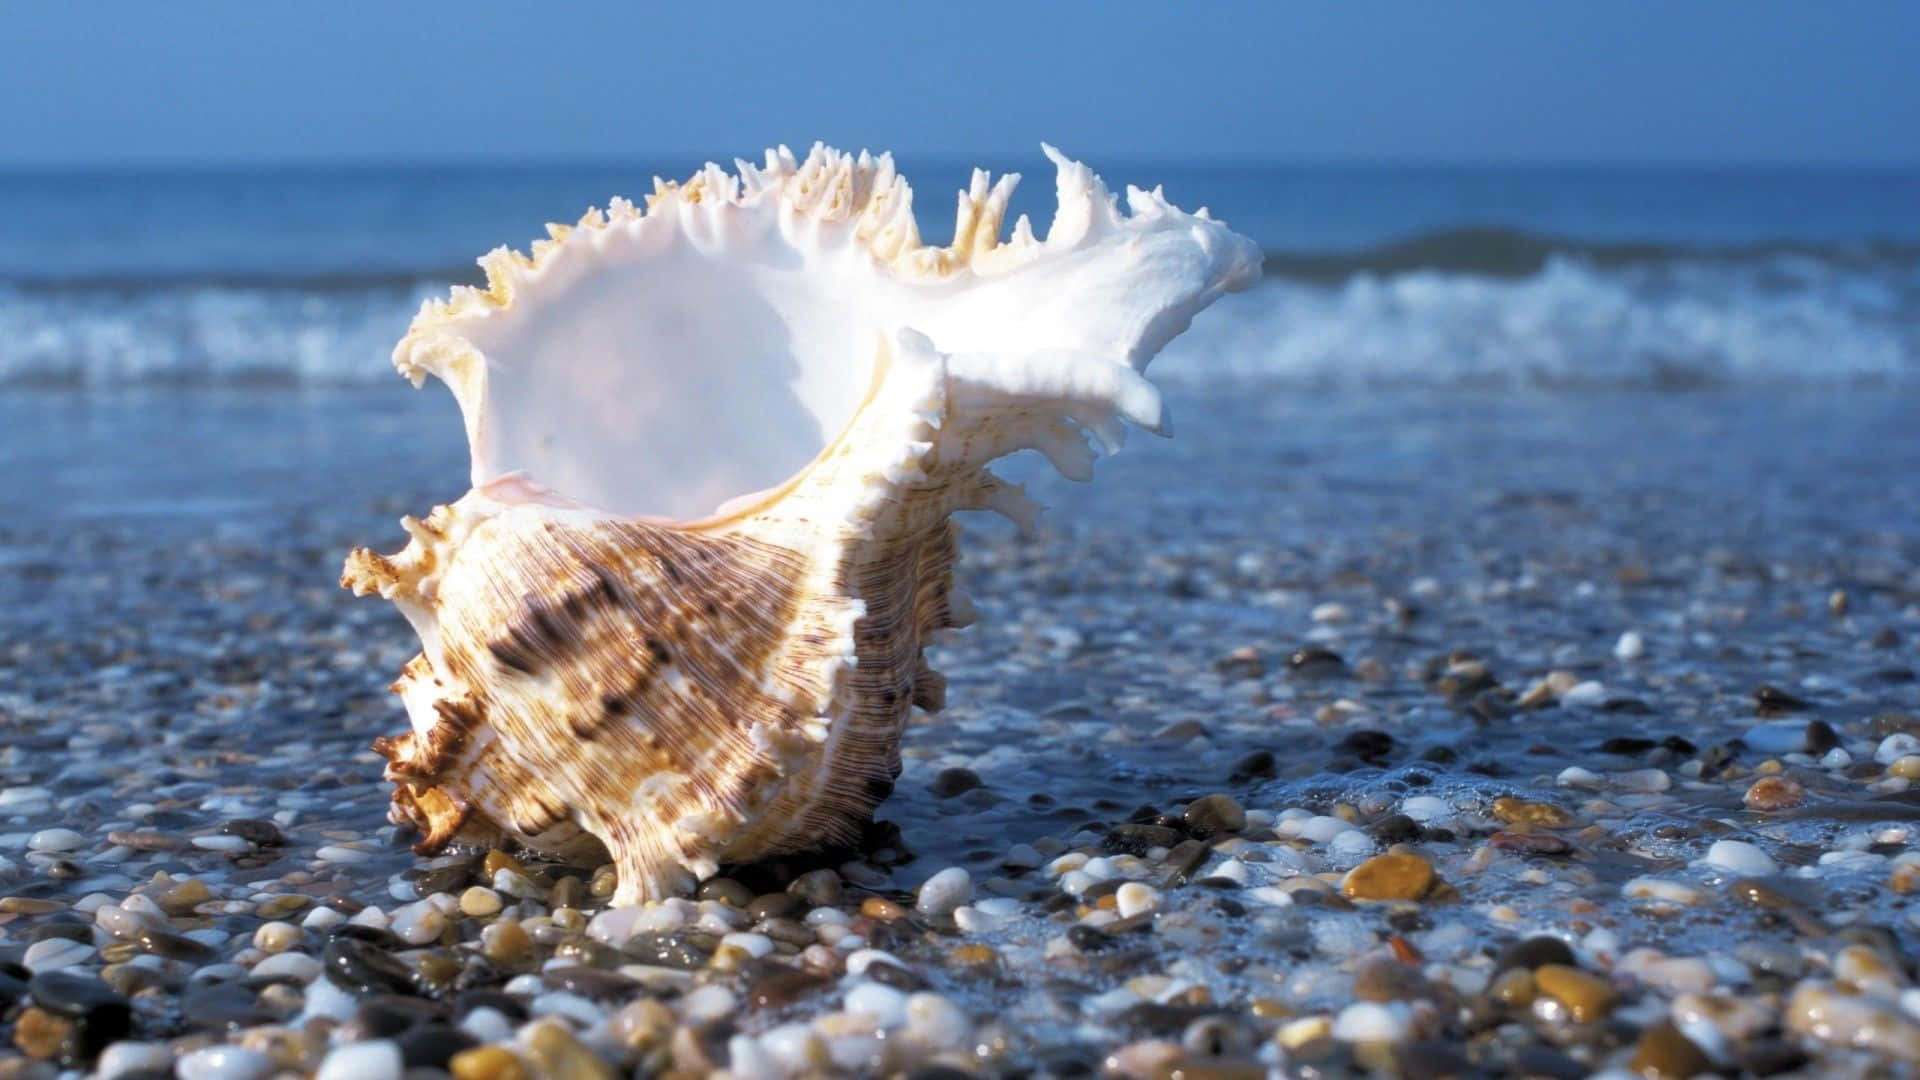 Mother Nature's perfect mini masterpieces, white seashells in the sand.